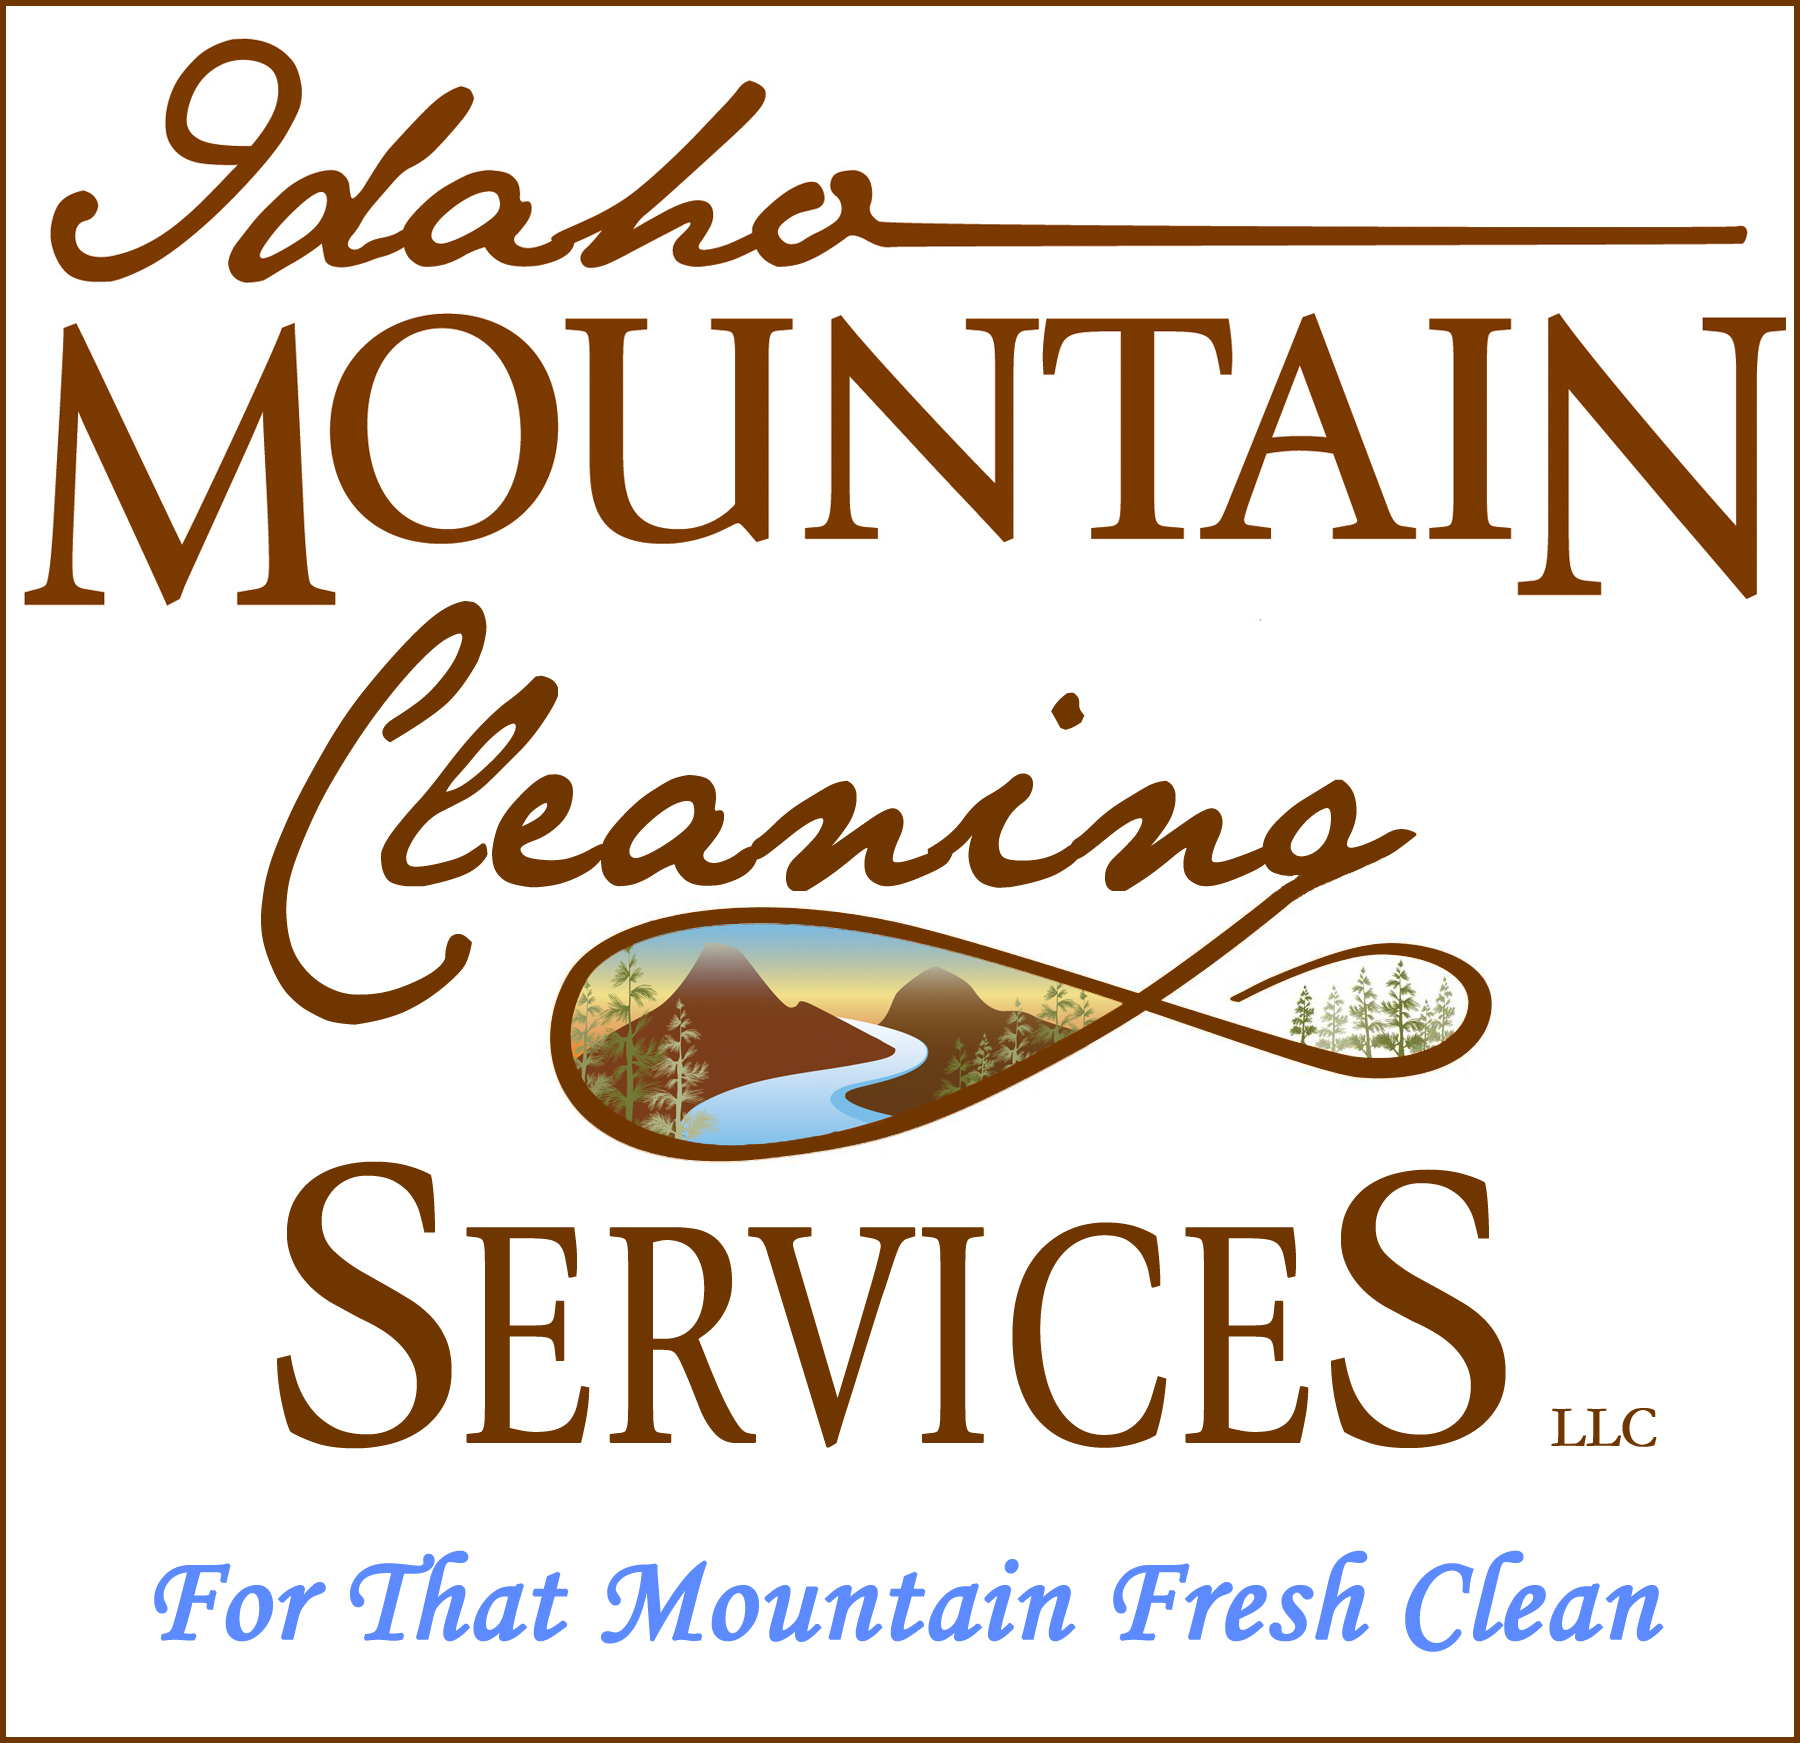 Idaho Mountain Cleaning Services